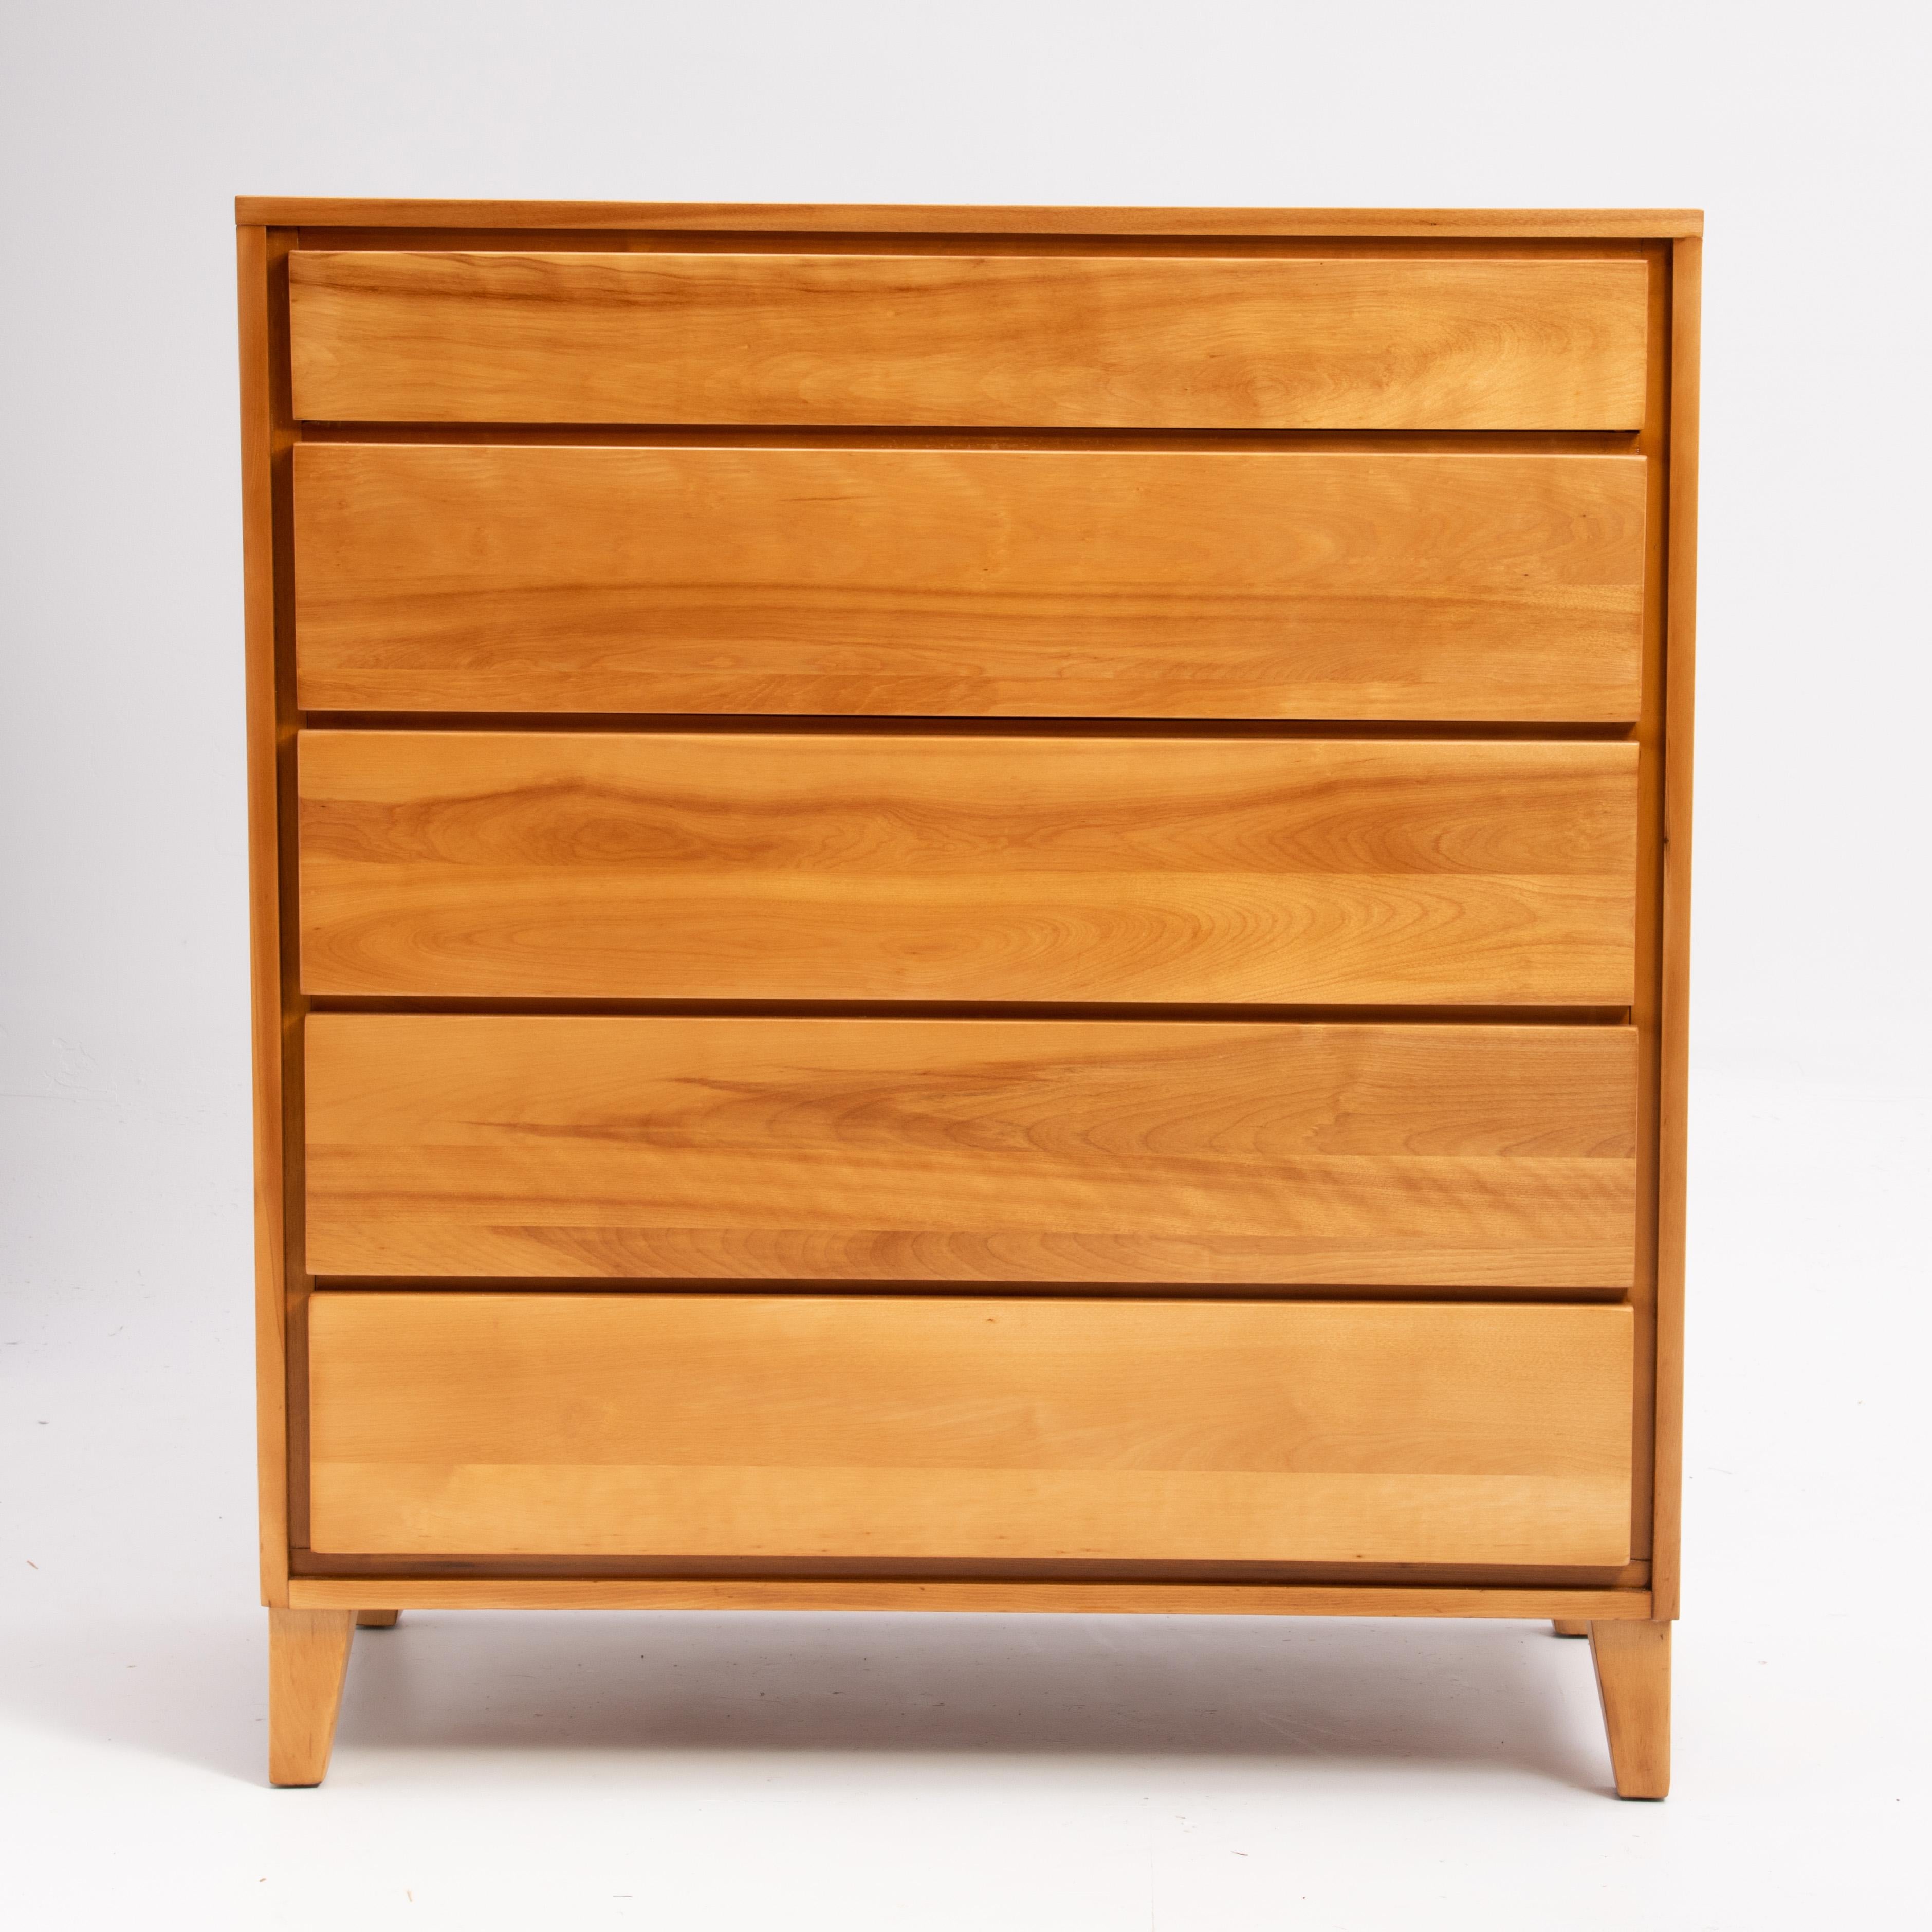 A Mid-Century Modern five-drawer solid birch dresser or chest of drawers by Leslie Diamond for the Conant Ball 